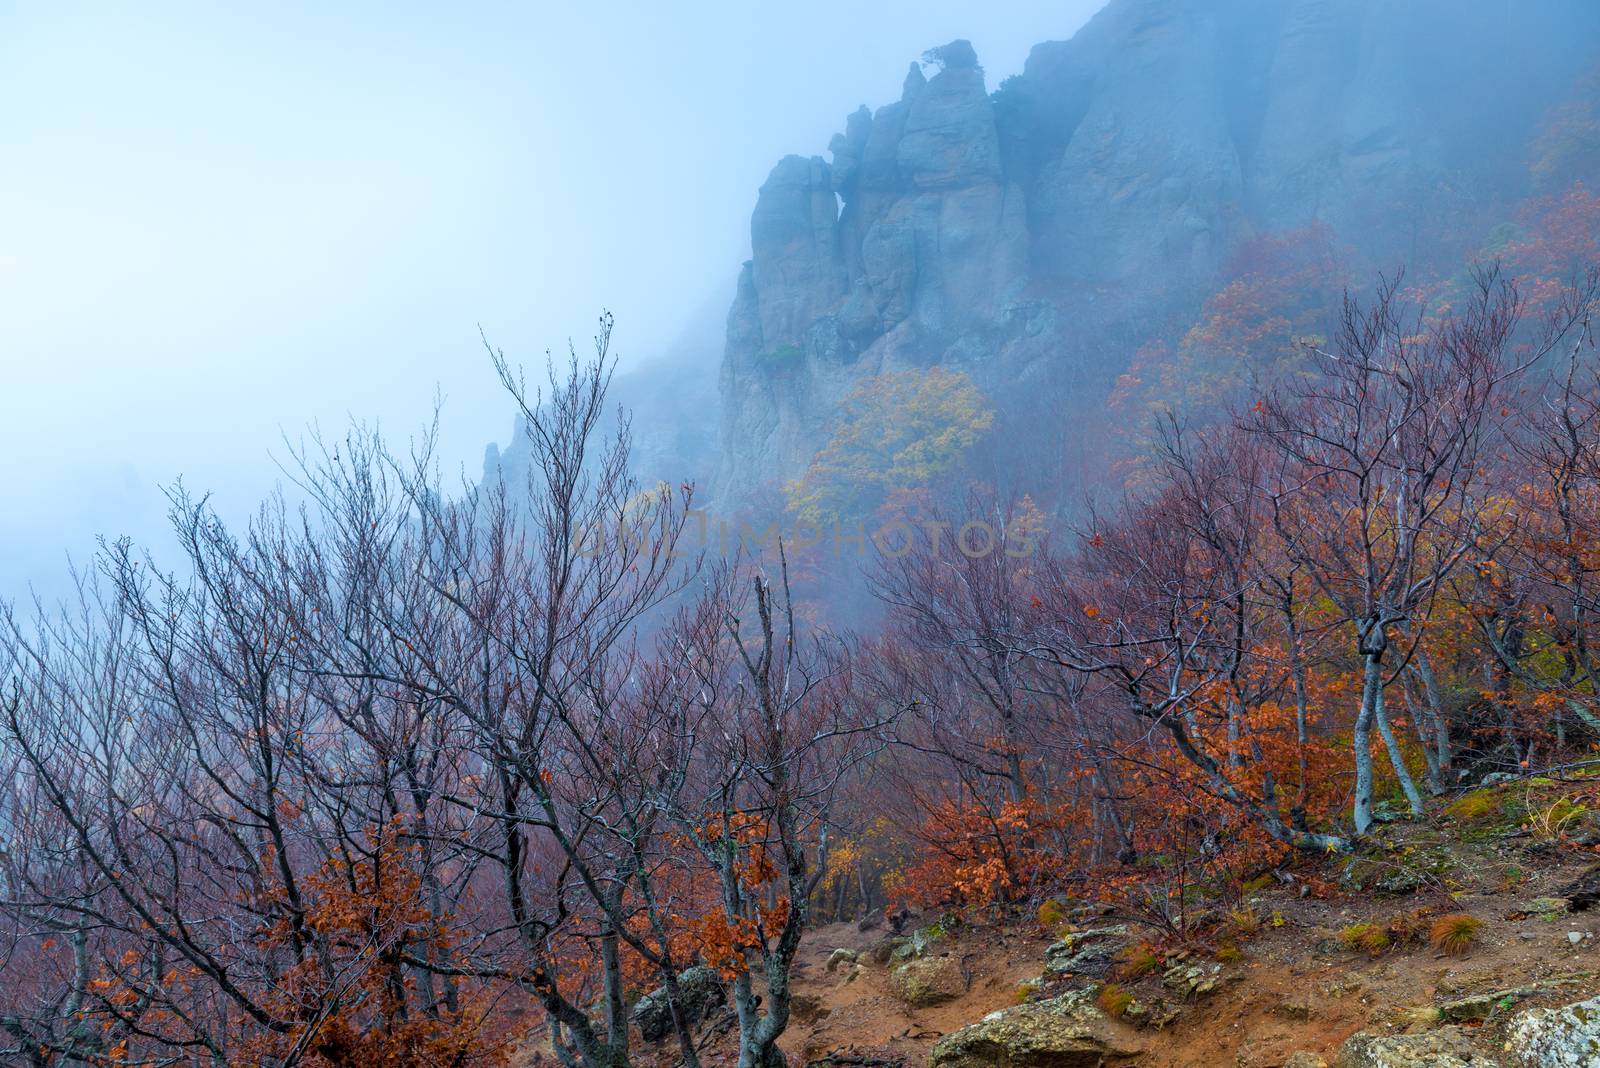 Beautiful mountains, view of bare trees and rocks, autumn landsc by kosmsos111